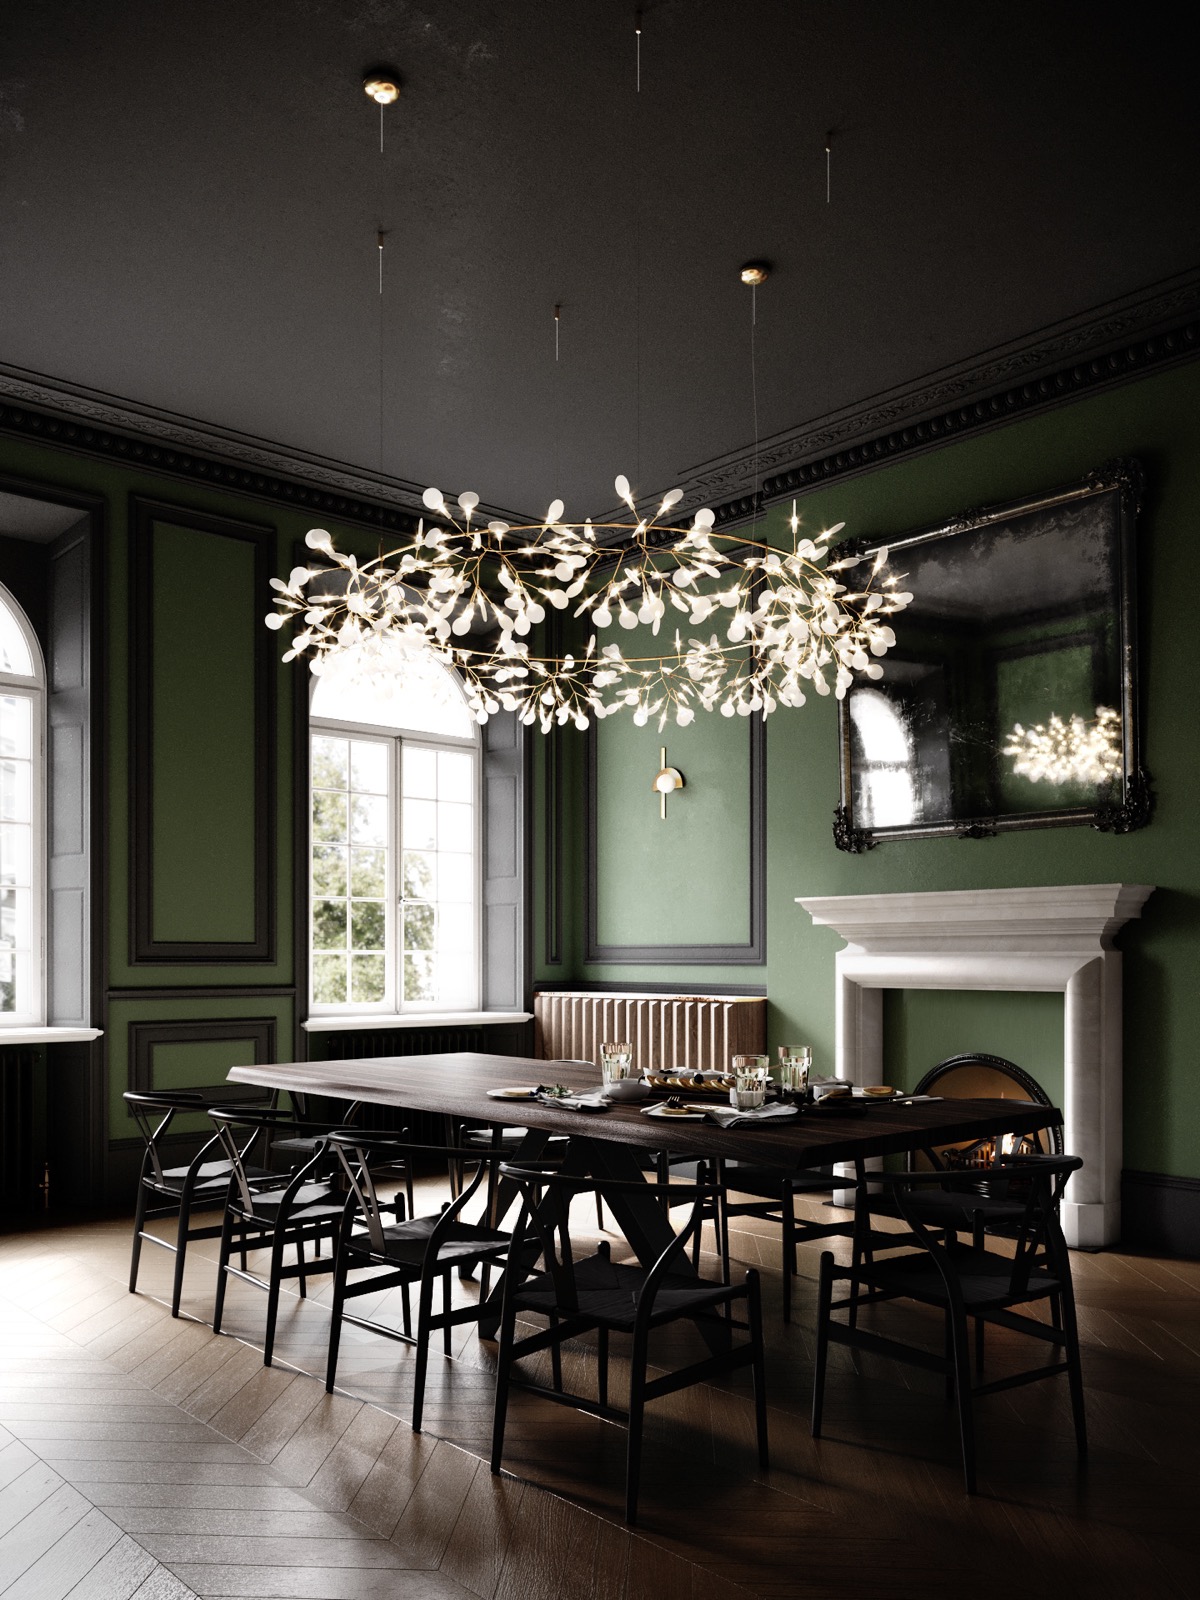 black-and-green-dining-room-600x800.jpg